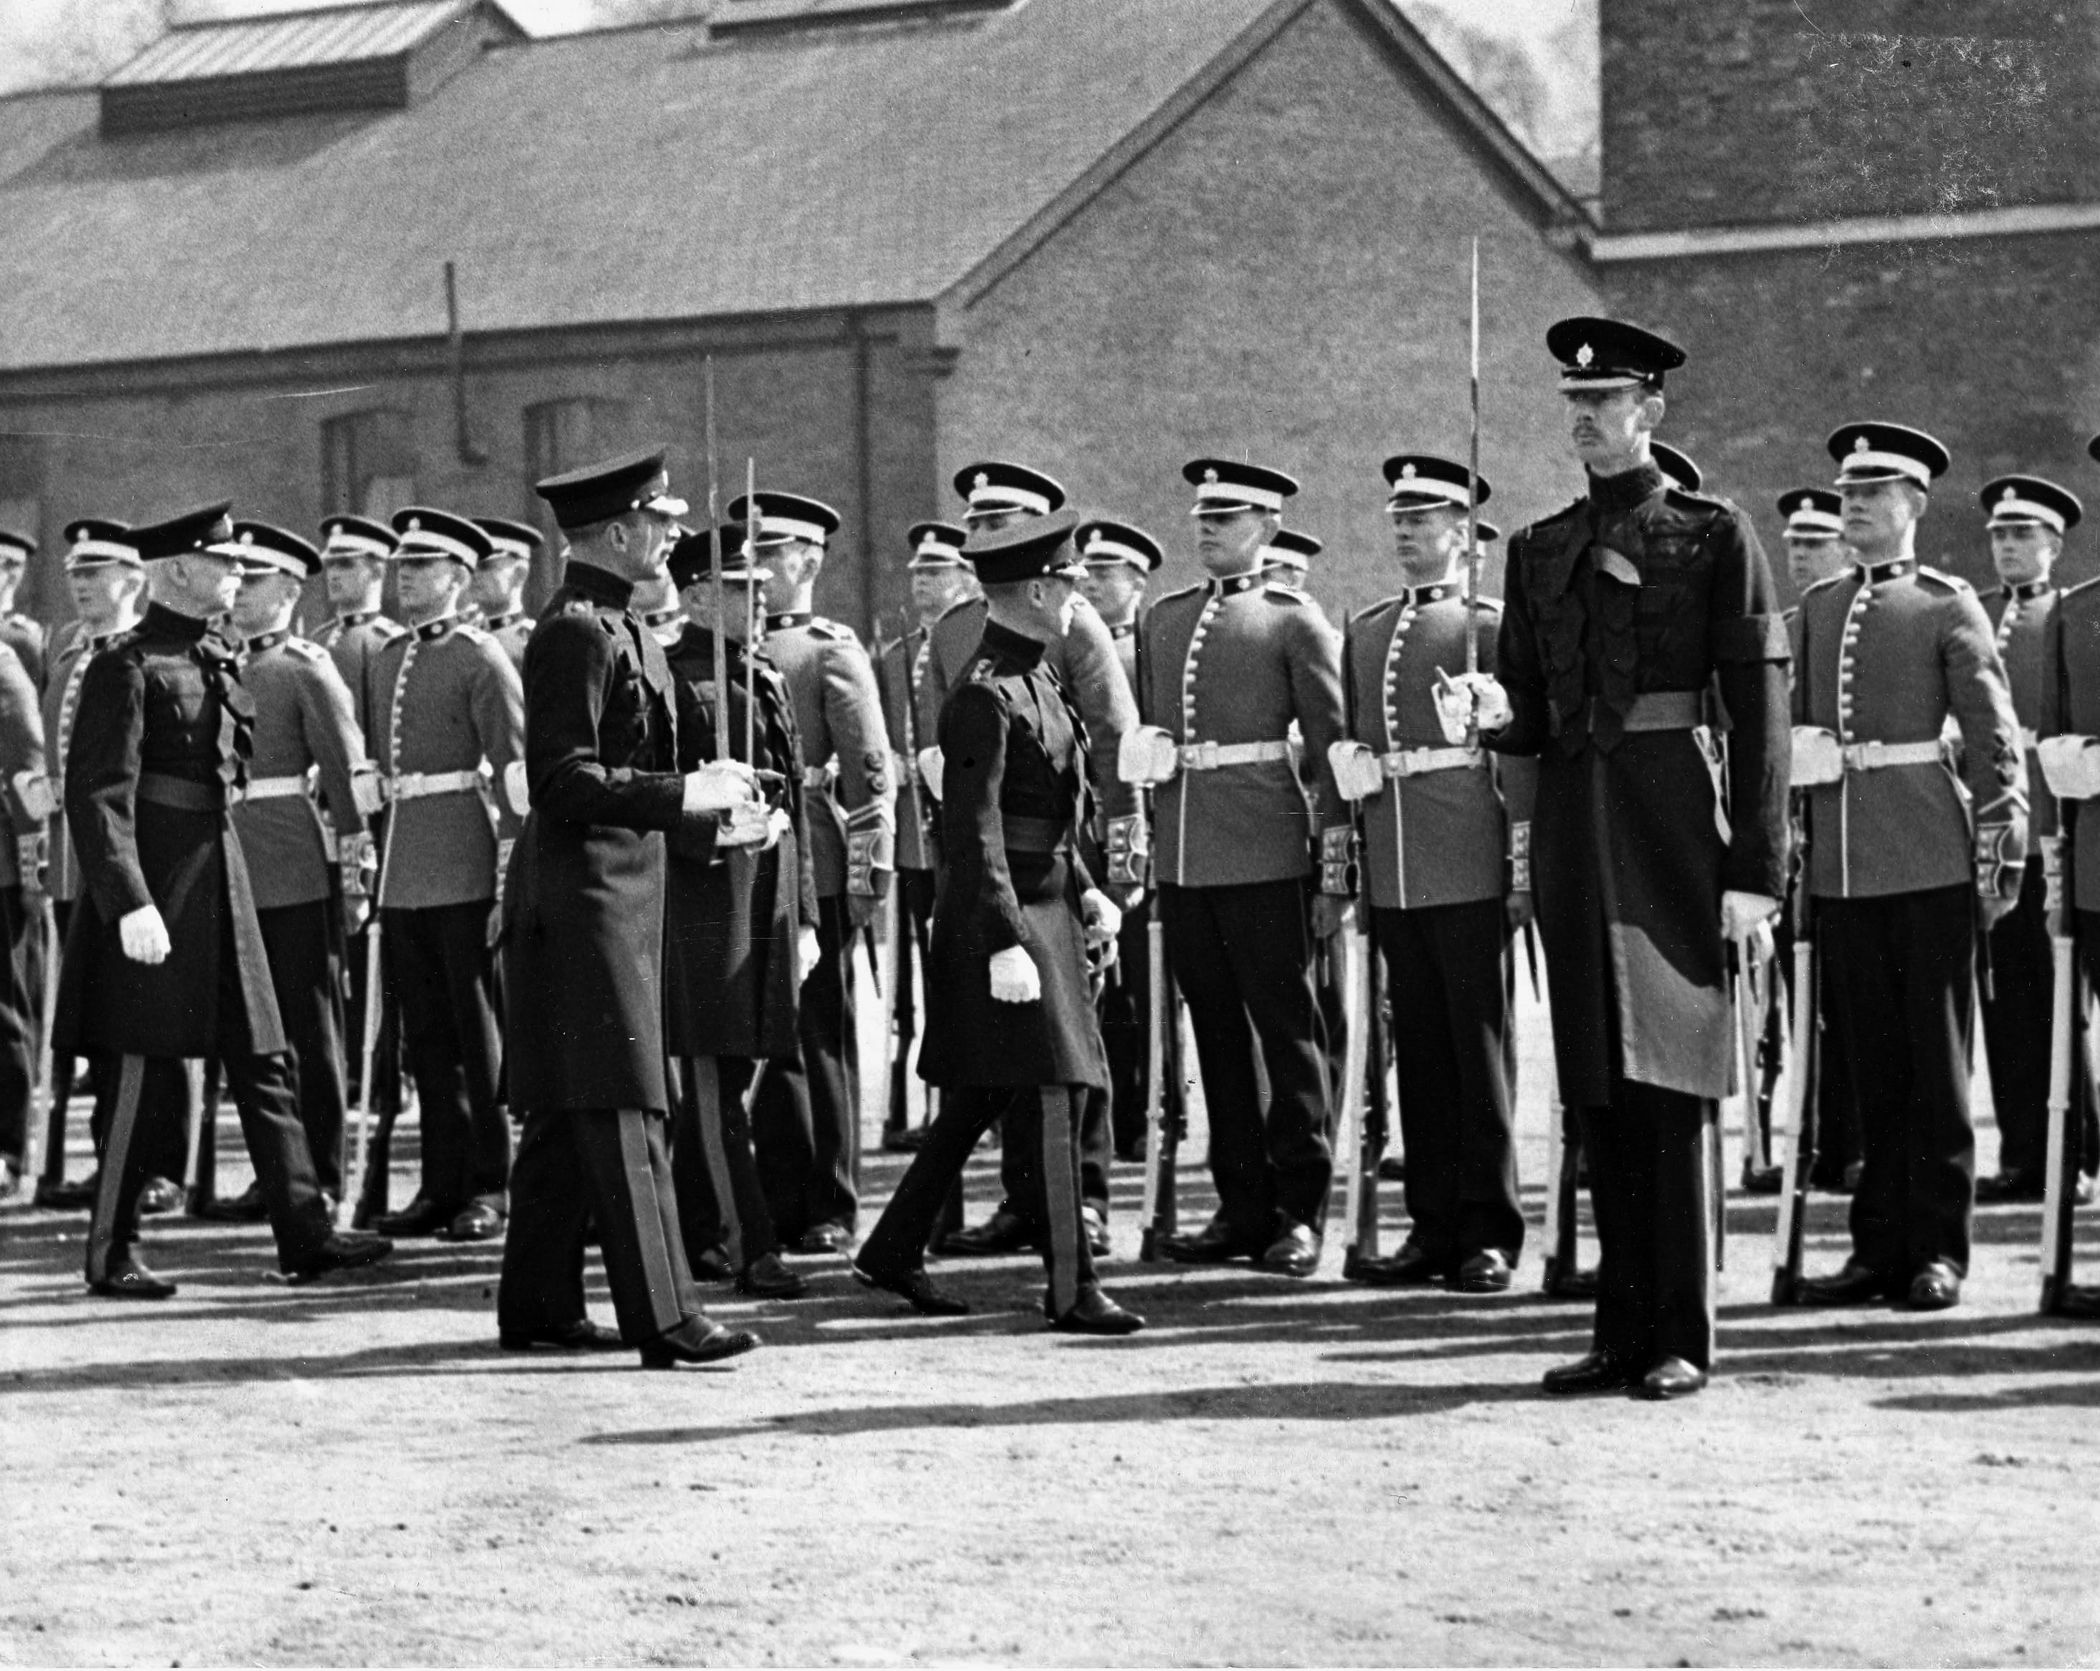 During his short reign, King Edward VIII inspects troops of the 1st Battalion, Coldstream Guards, at Victoria Barracks in Windsor on April 24, 1936.